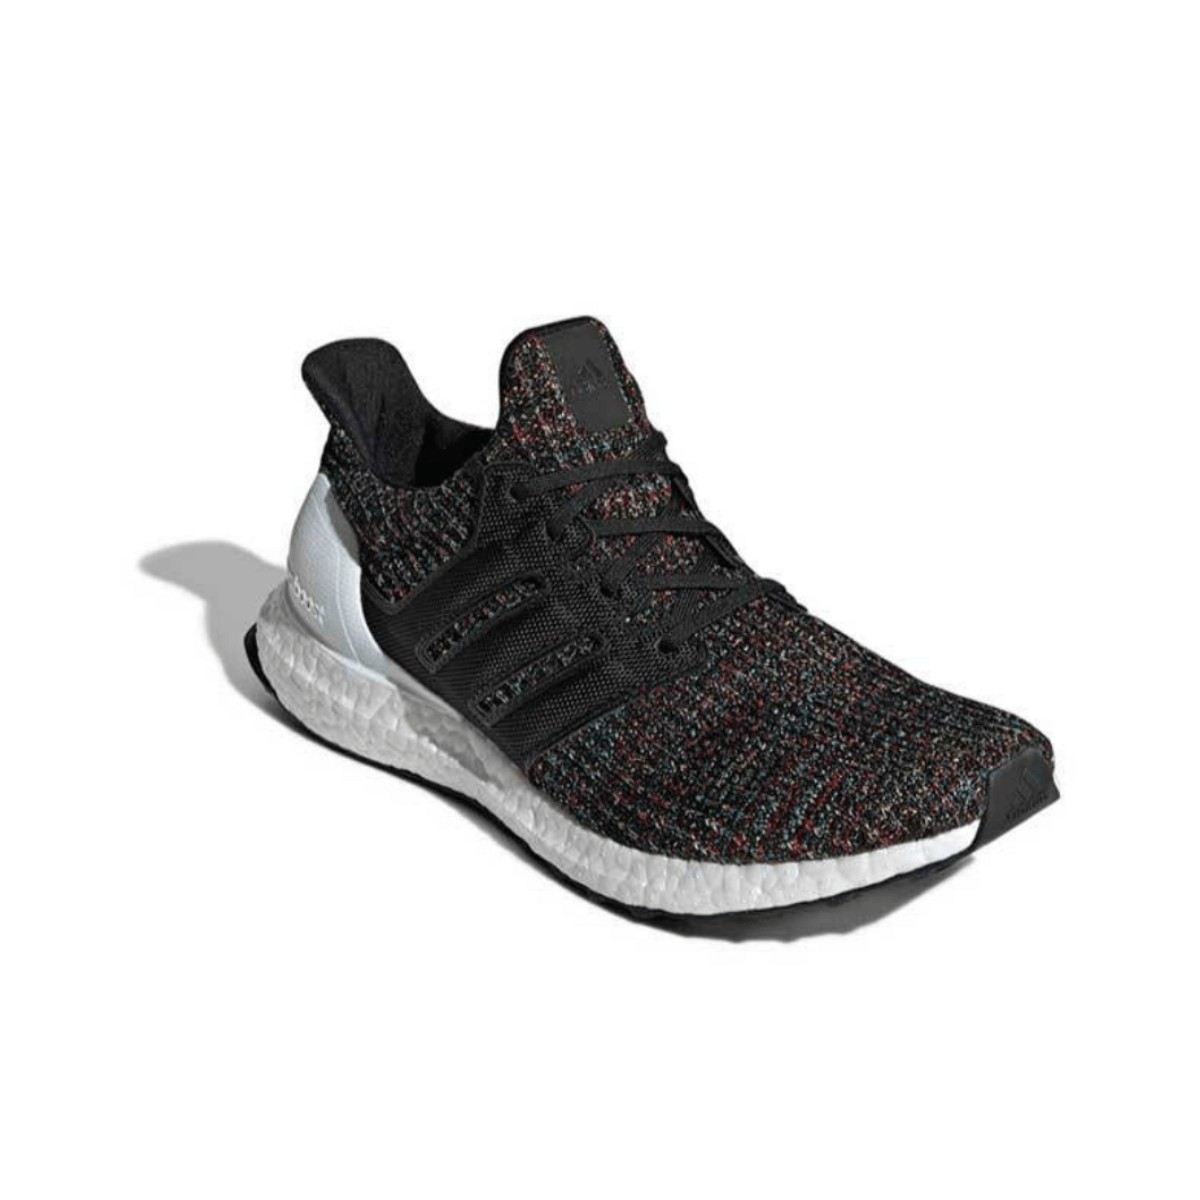 Adidas Ultra Boost 4.0 Multicolor PV19 Men's Shoes